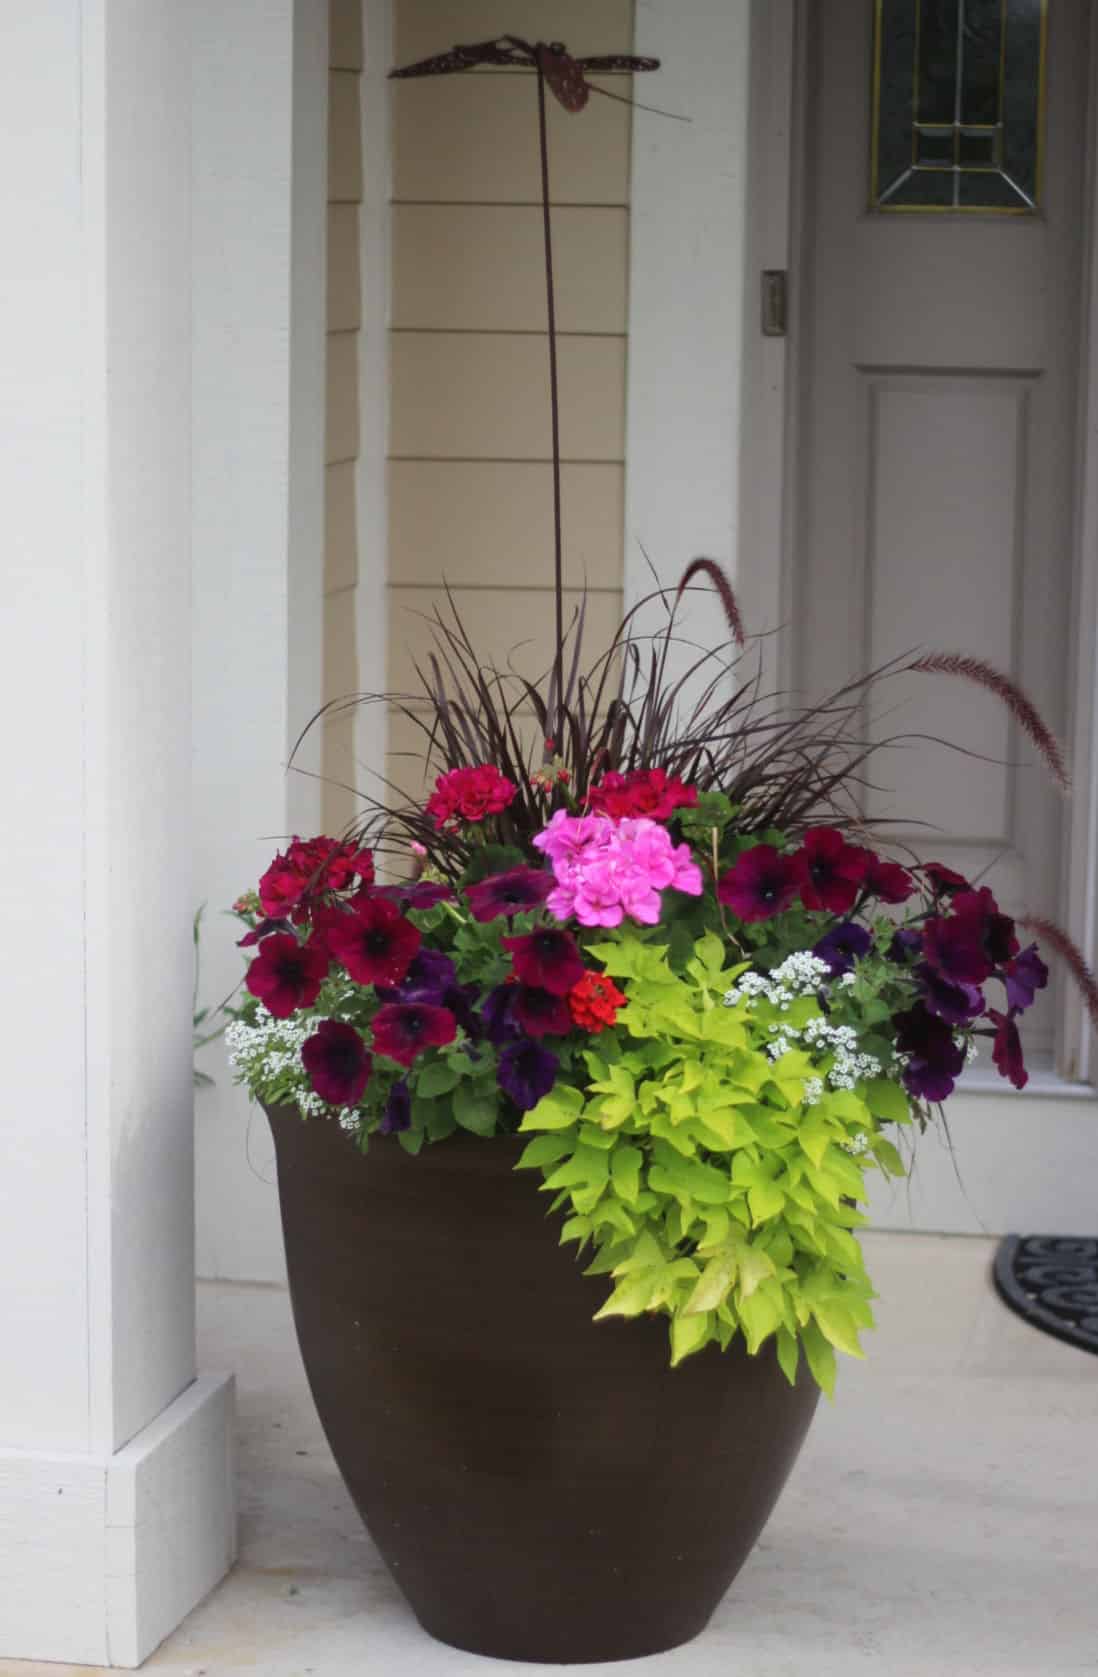 Tall planter with pink geraniums, purple petunias and lime sweet potato vine.  The planter has a tall rust colored decorative stake in it.